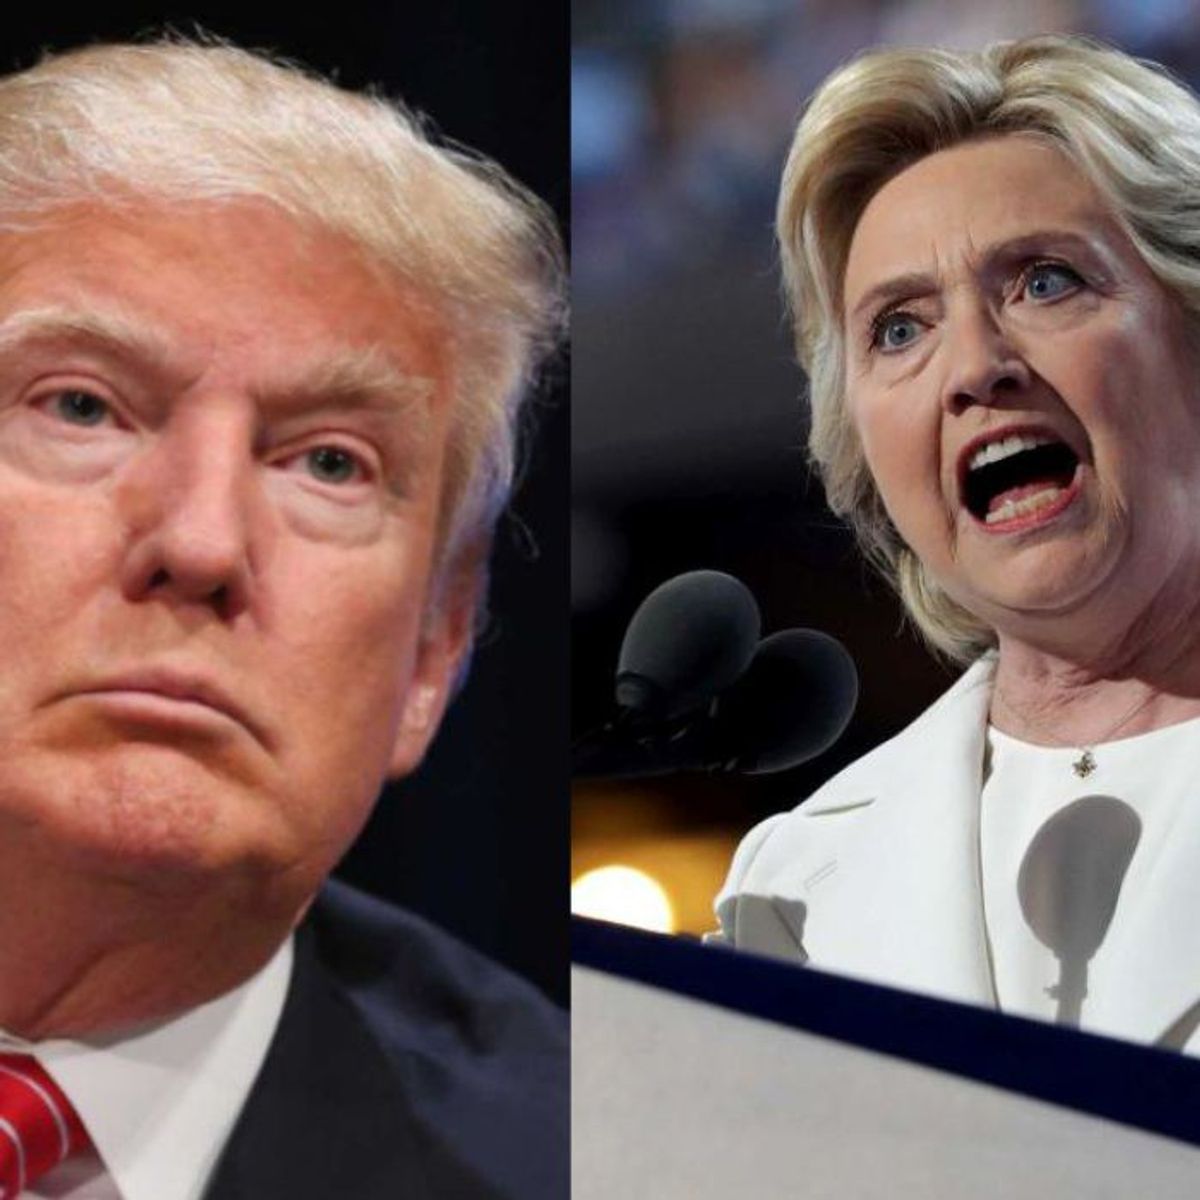 The Debate Between Trump and Hilary: The New Reality TV Show of America